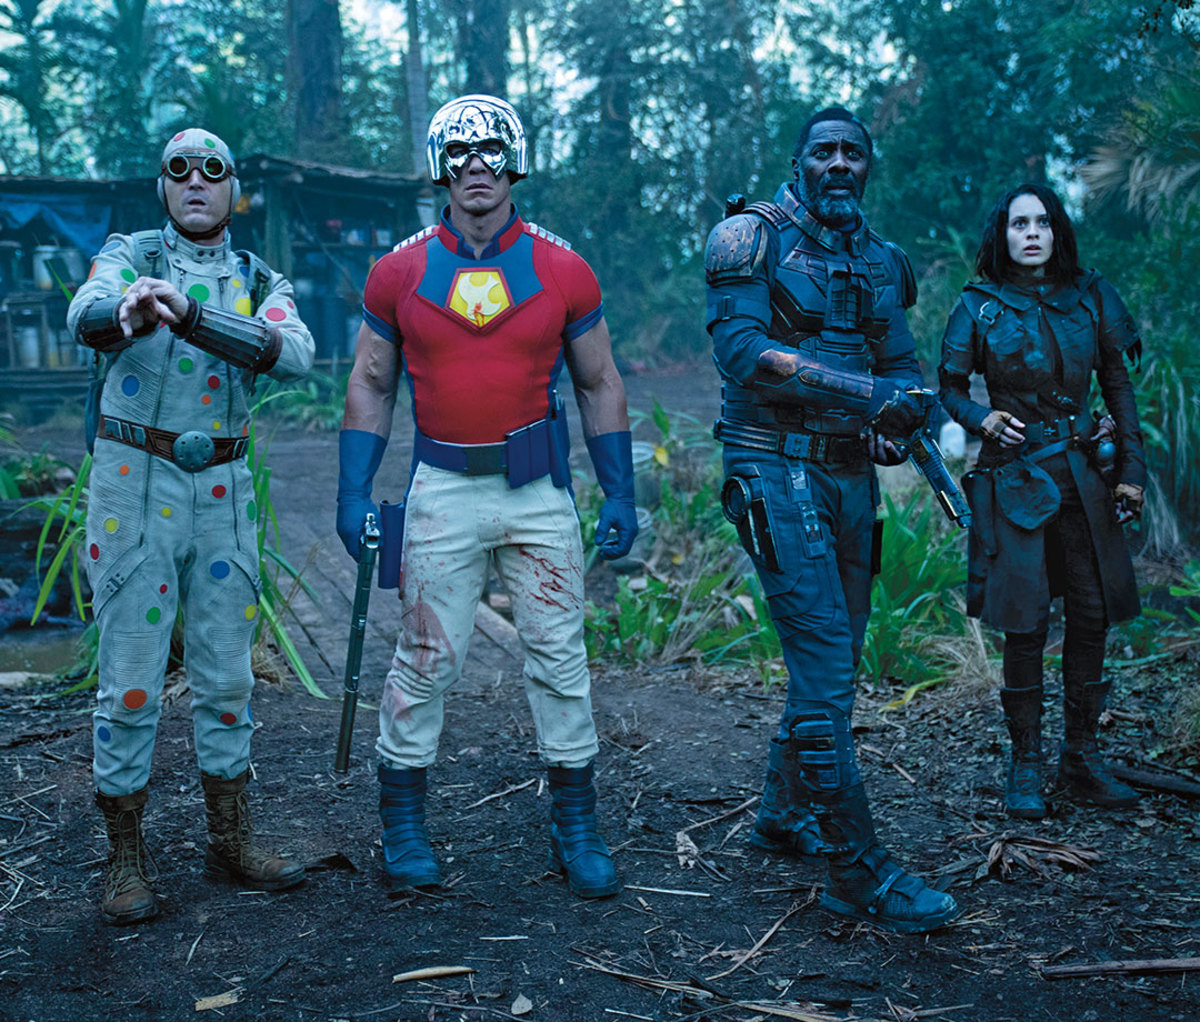 From left: David Dastmalchian as Polka-Dot Man, John Cena as Peacemaker, Idris Elba as Bloodsport, and Daniela Melchior as Ratcatcher 2 in 'The Suicide Squad'